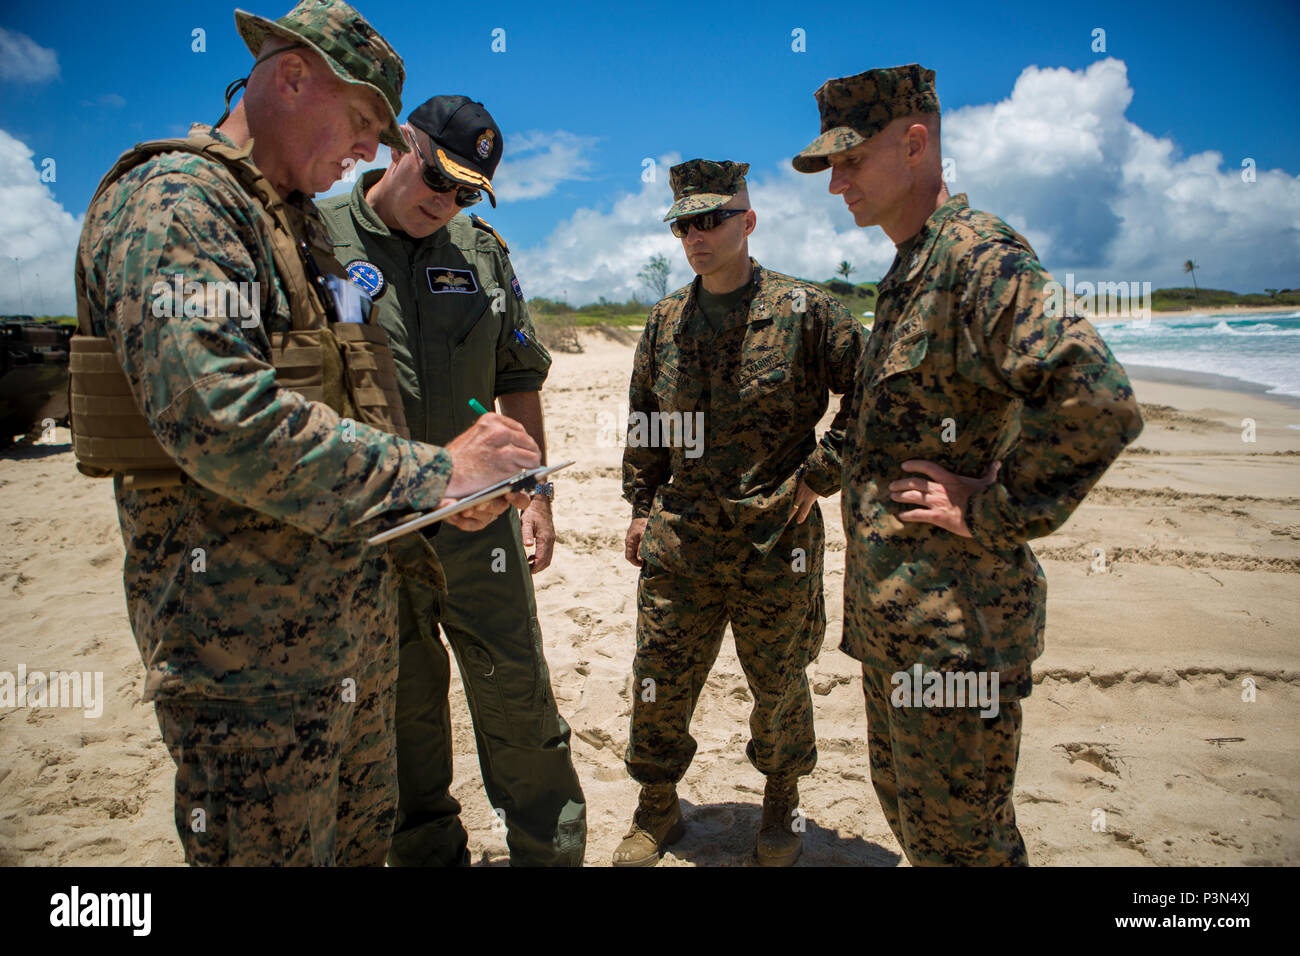 160714-M-JM737-007 MARINE CORPS BASE HAWAII (July 14, 2016) - U.S .Marine Staff Sgt. Kyle Nicholson briefs Brig. Gen. David Bellon, Royal New Zealand Navy Commodore Jim Gilmour and Col. Carl Cooper on the data he collected as Assault Amphibious Vehicles with Combat Assault Company, 3rd Marine Regiment came to shore during Rim of the Pacific 2016. Bellon is the Fleet Marine Officer, Amphibious Force; Gilmour is the Combined Forces Amphibious Component Commander; Cooper is the Commanding Officer, Provisional Marine Expeditionary Brigade Hawaii. Twenty-six nations, 49 ships, six submarines, about Stock Photo